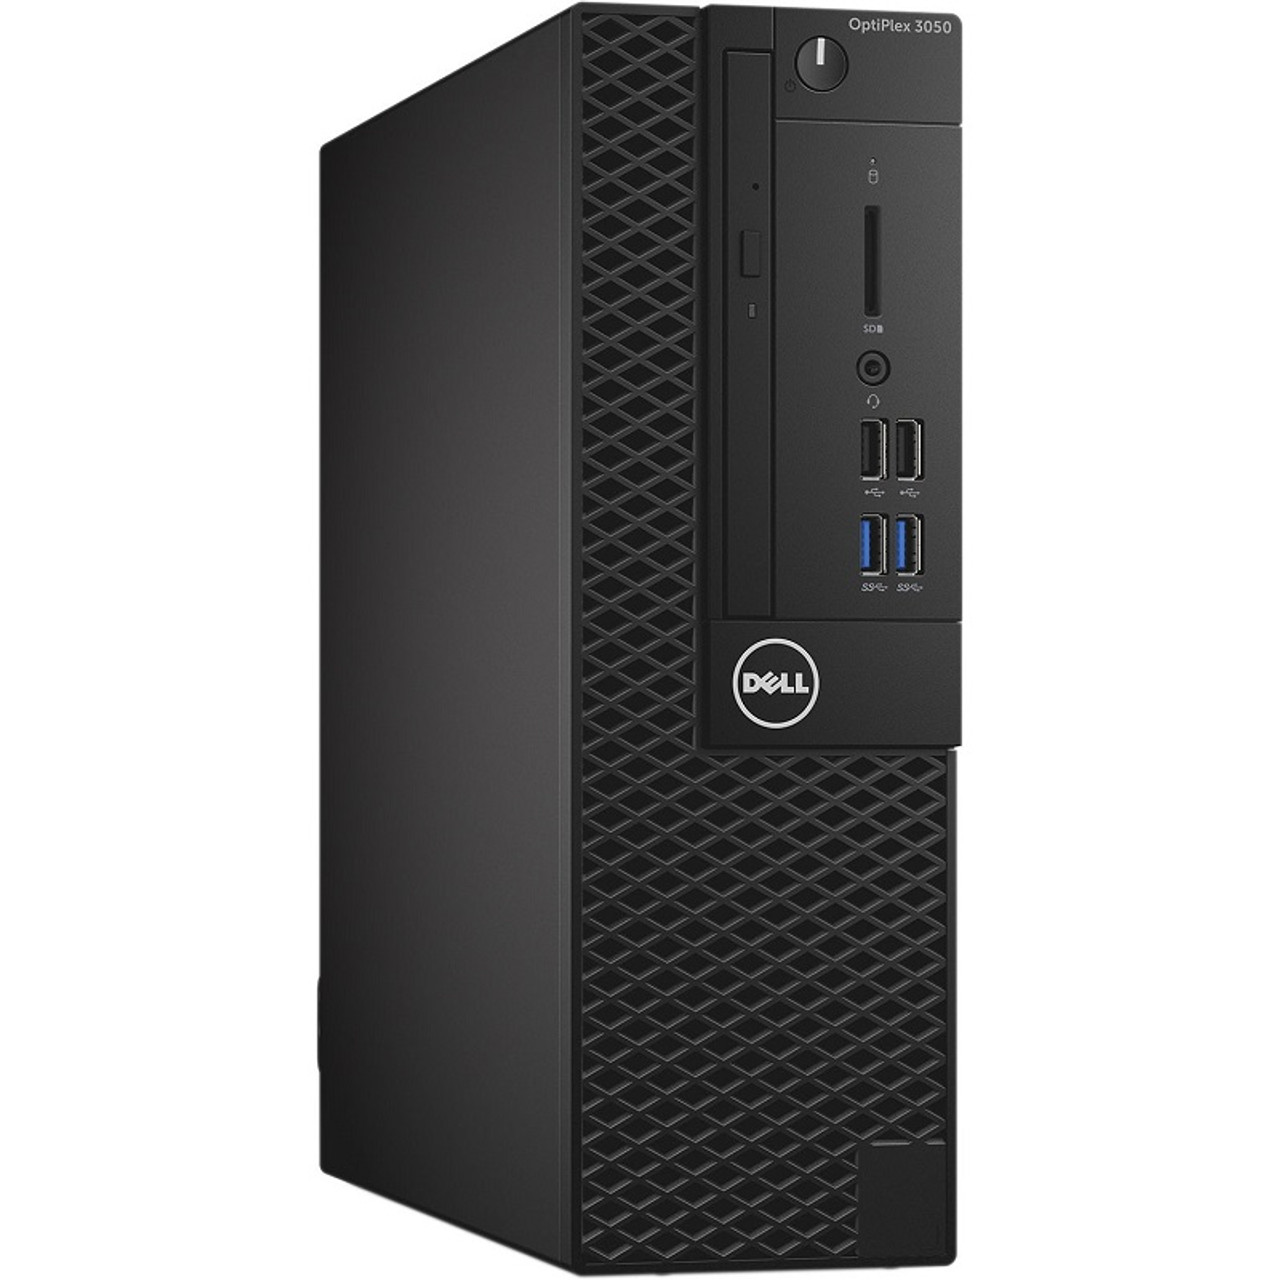 Dell OptiPlex 3050 SFF Intel Core i7-7700 3.6GHz up to 4.2GHz 32GB